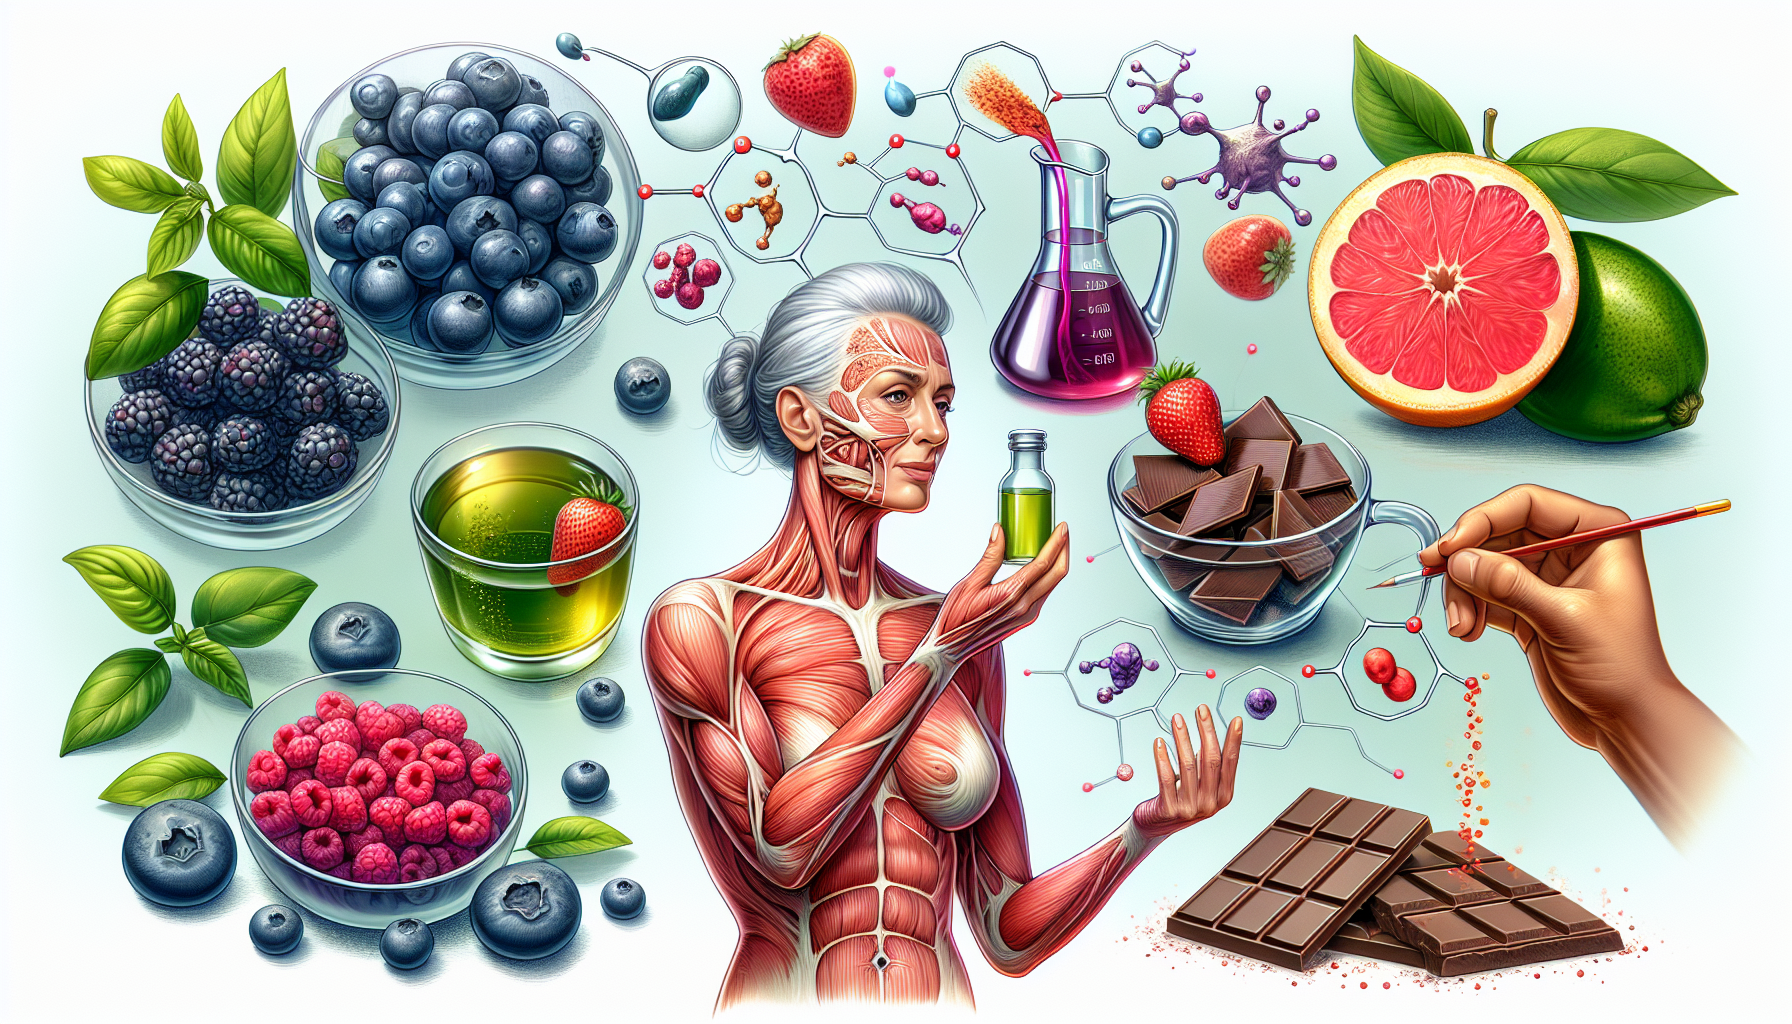 Can A Lack Of Antioxidants In The Diet Affect Aging?